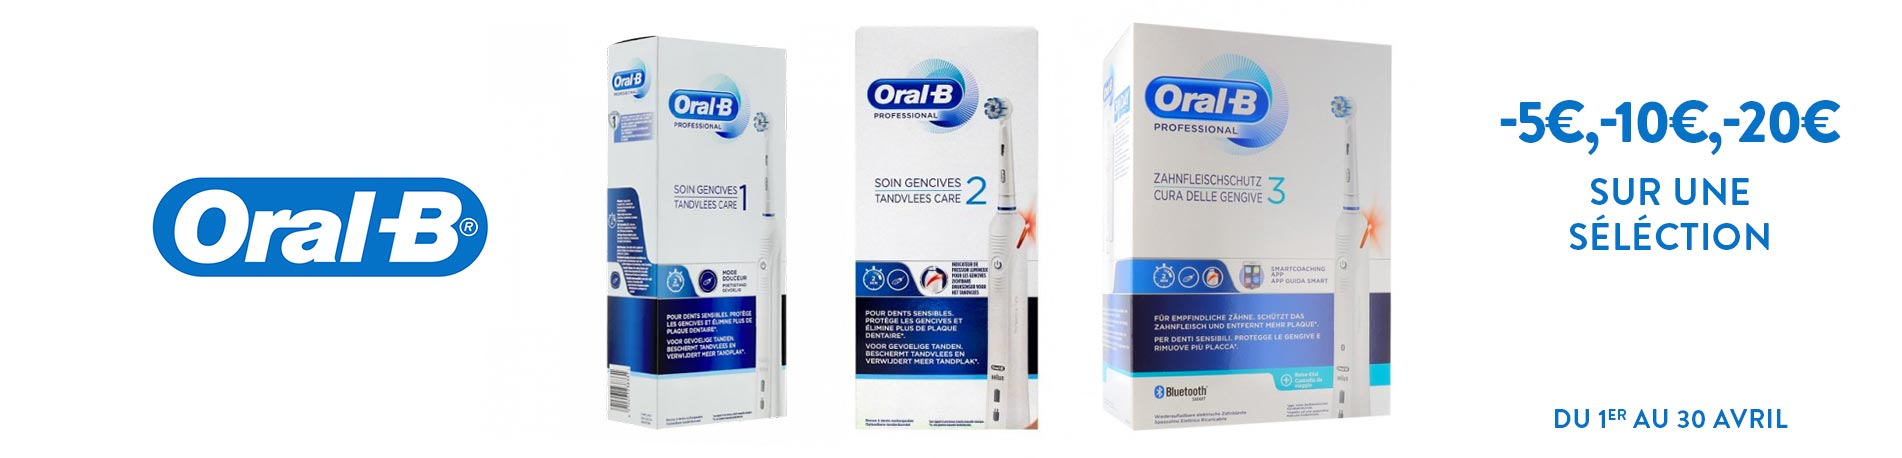 Promotion Oral-B Proffessional